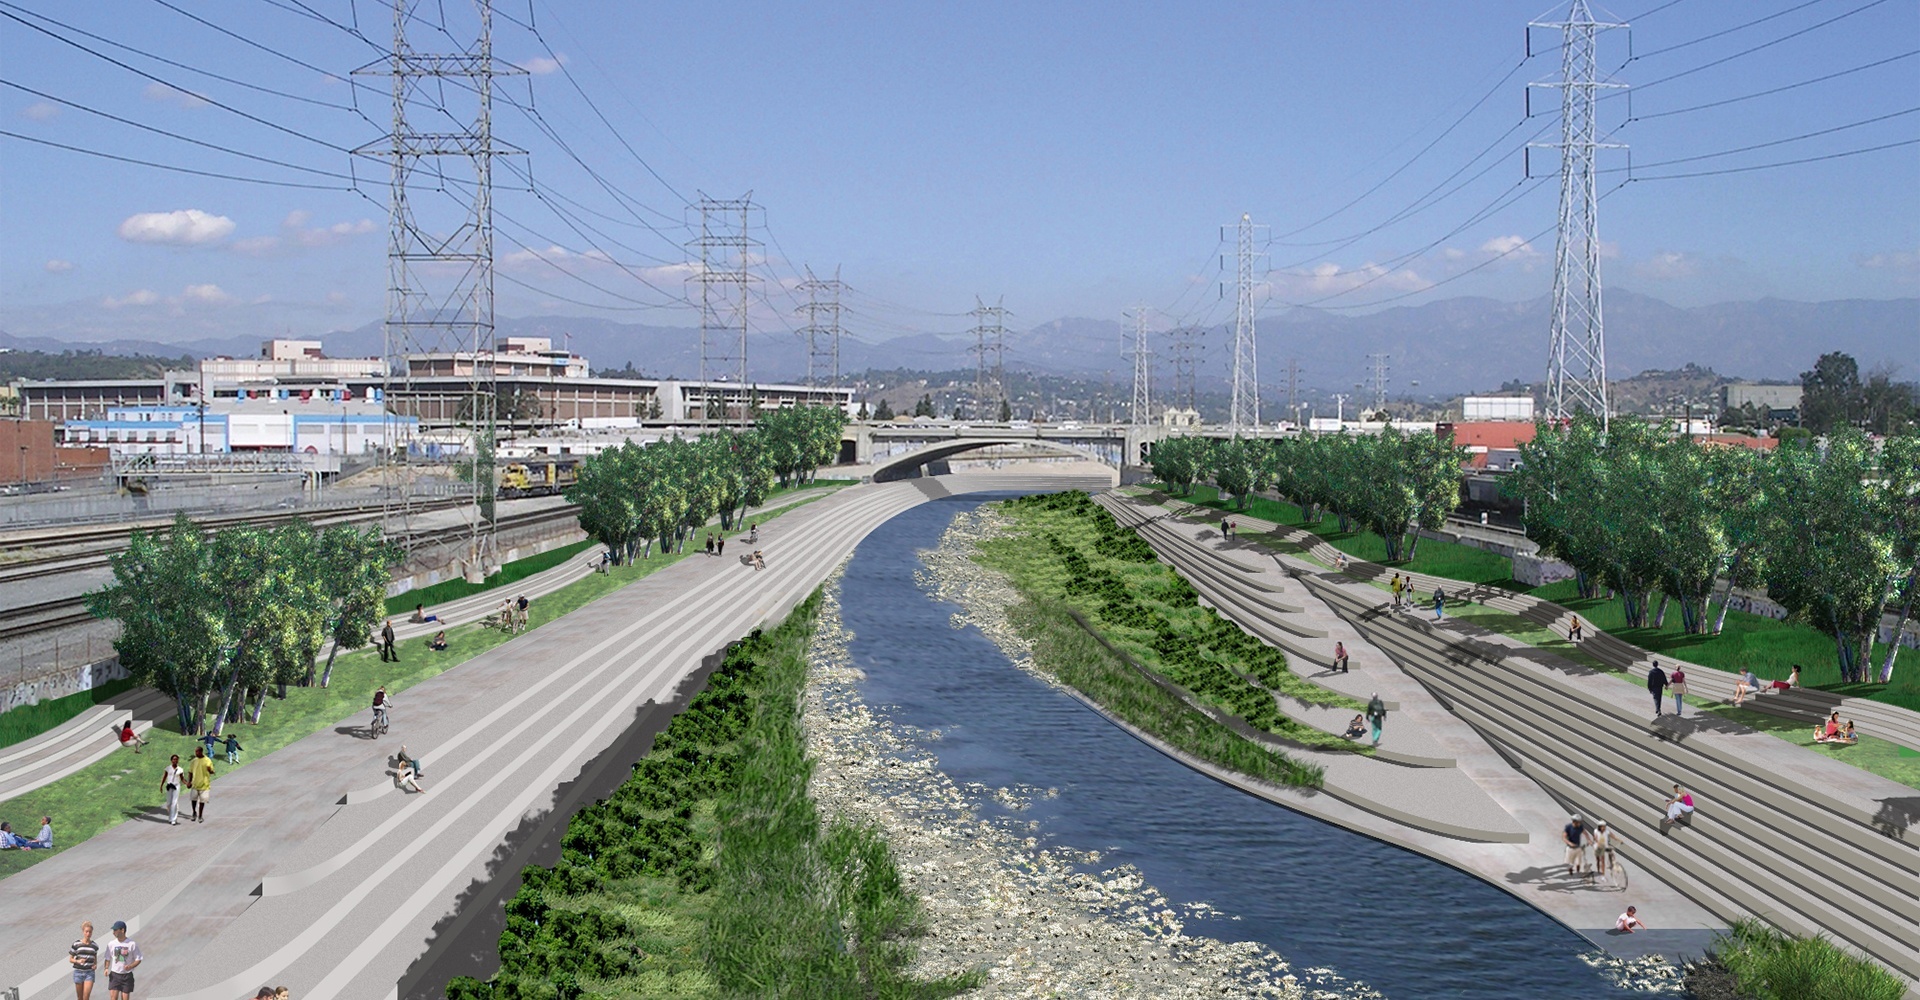 The Los Angeles Water Conundrum: Adaptability by Design